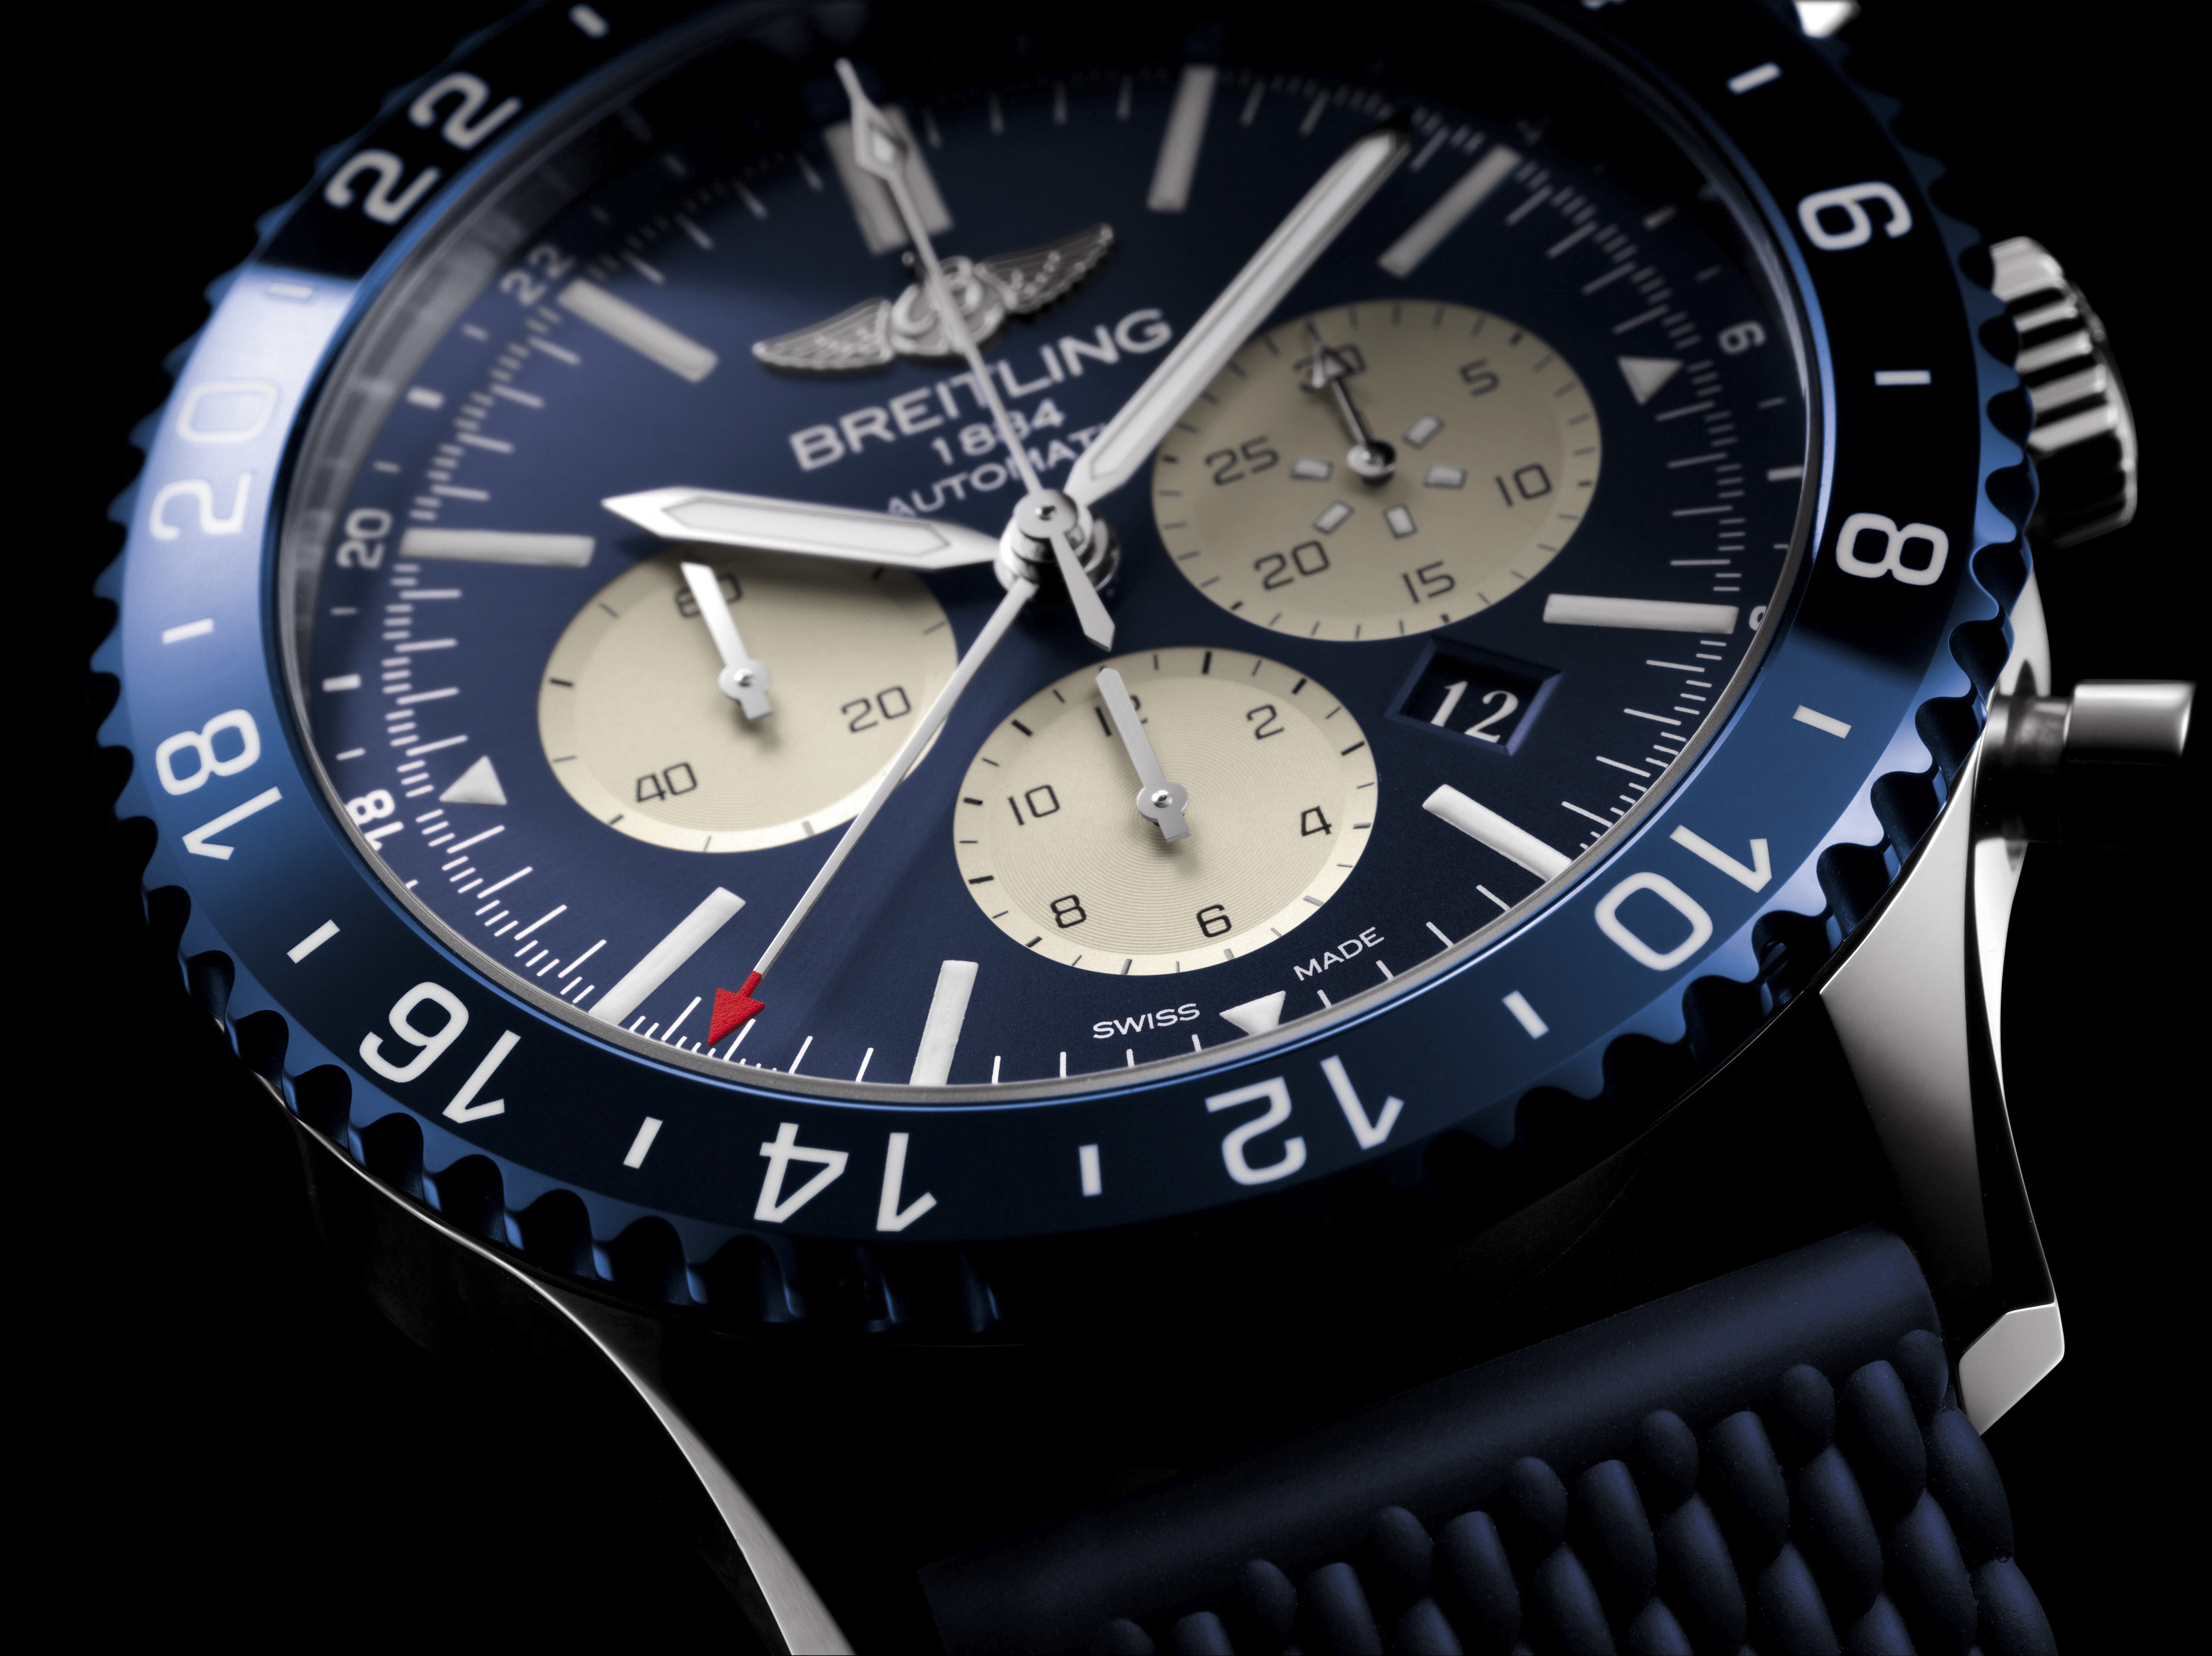 Post Magazine’s watch columnist, who is feeling all Scatman John, reviews three beautifully designed timepieces from Panerai, Longines and Breitling